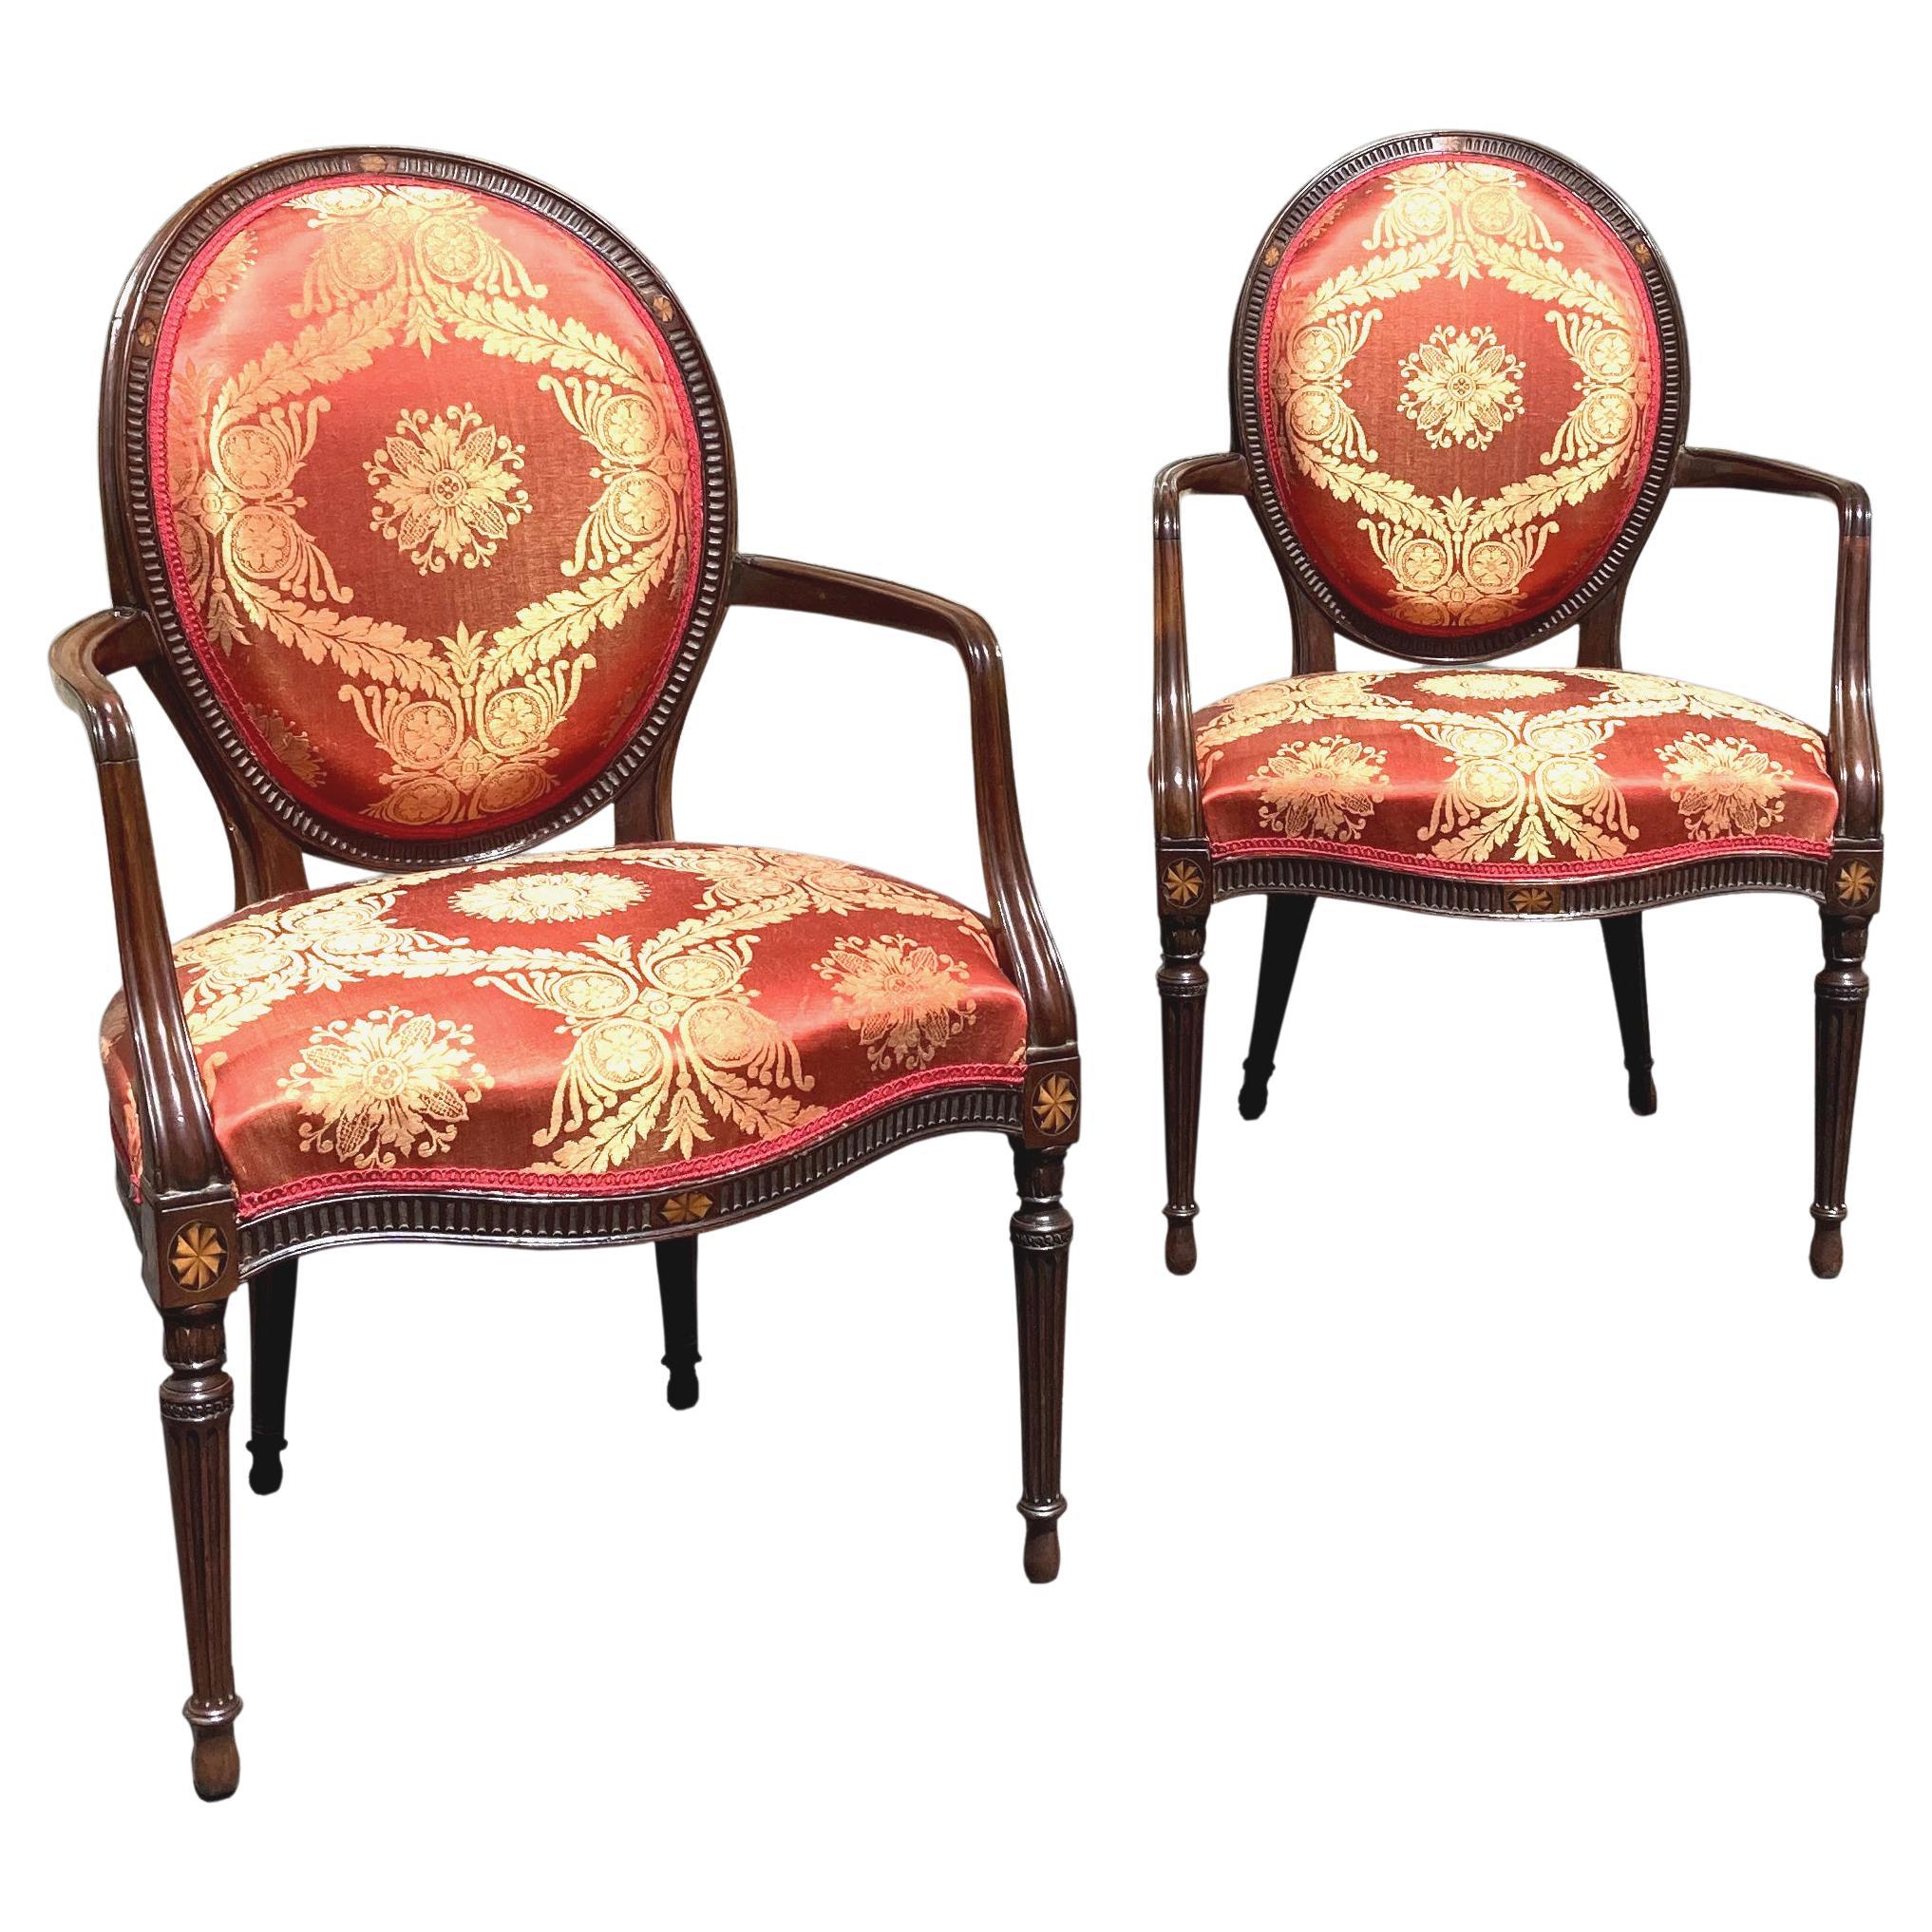 Pair of George III Mahogany Armchairs in Red Damask; Manner of John Linnell For Sale